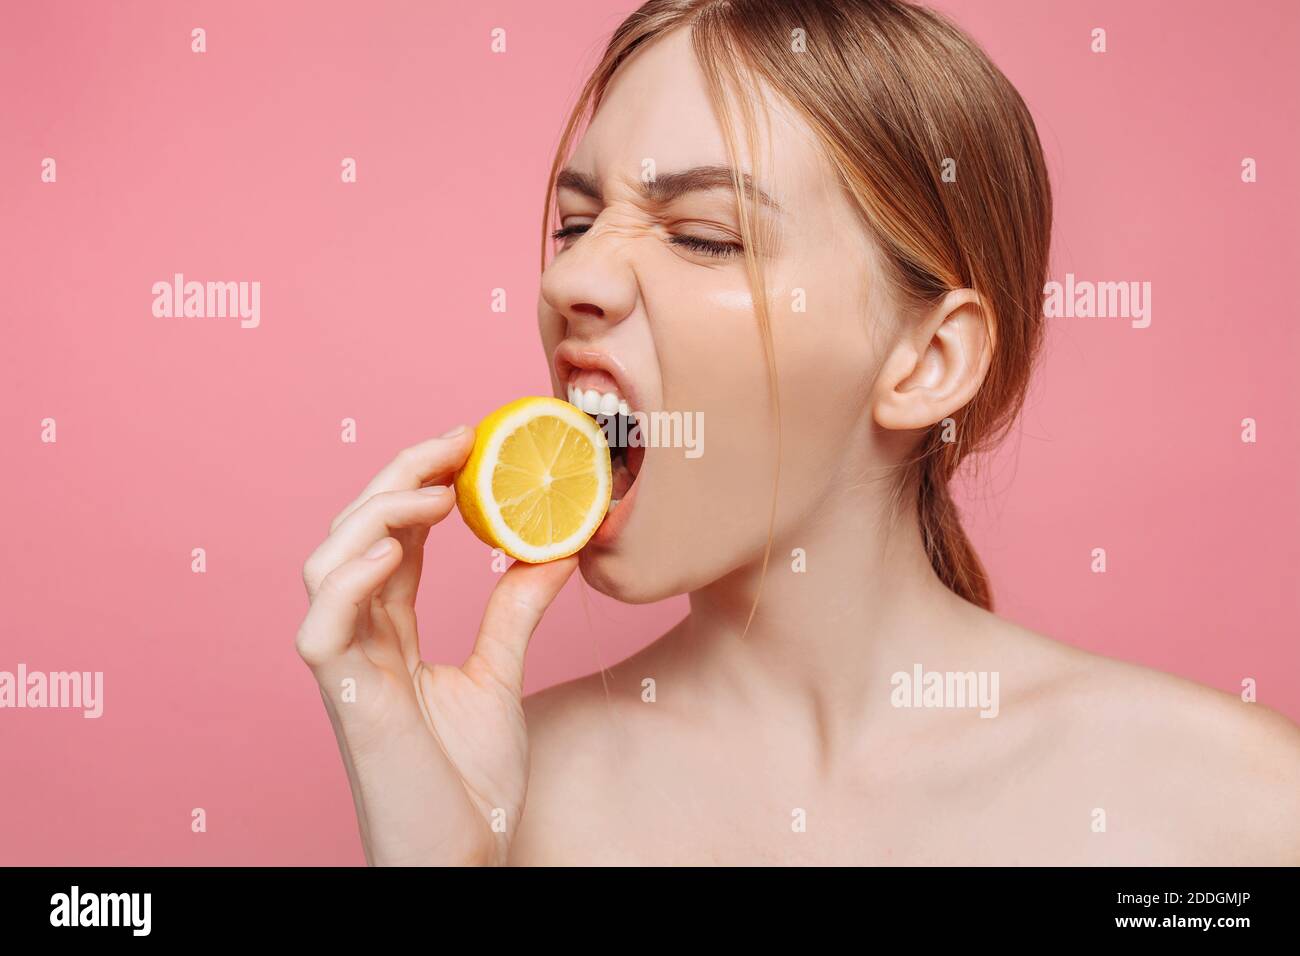 Portrait of a cheerful feminine girl, natural clear skin, girl with a piece of lemon, trying to bite him, isolated against a pink background. Skin car Stock Photo